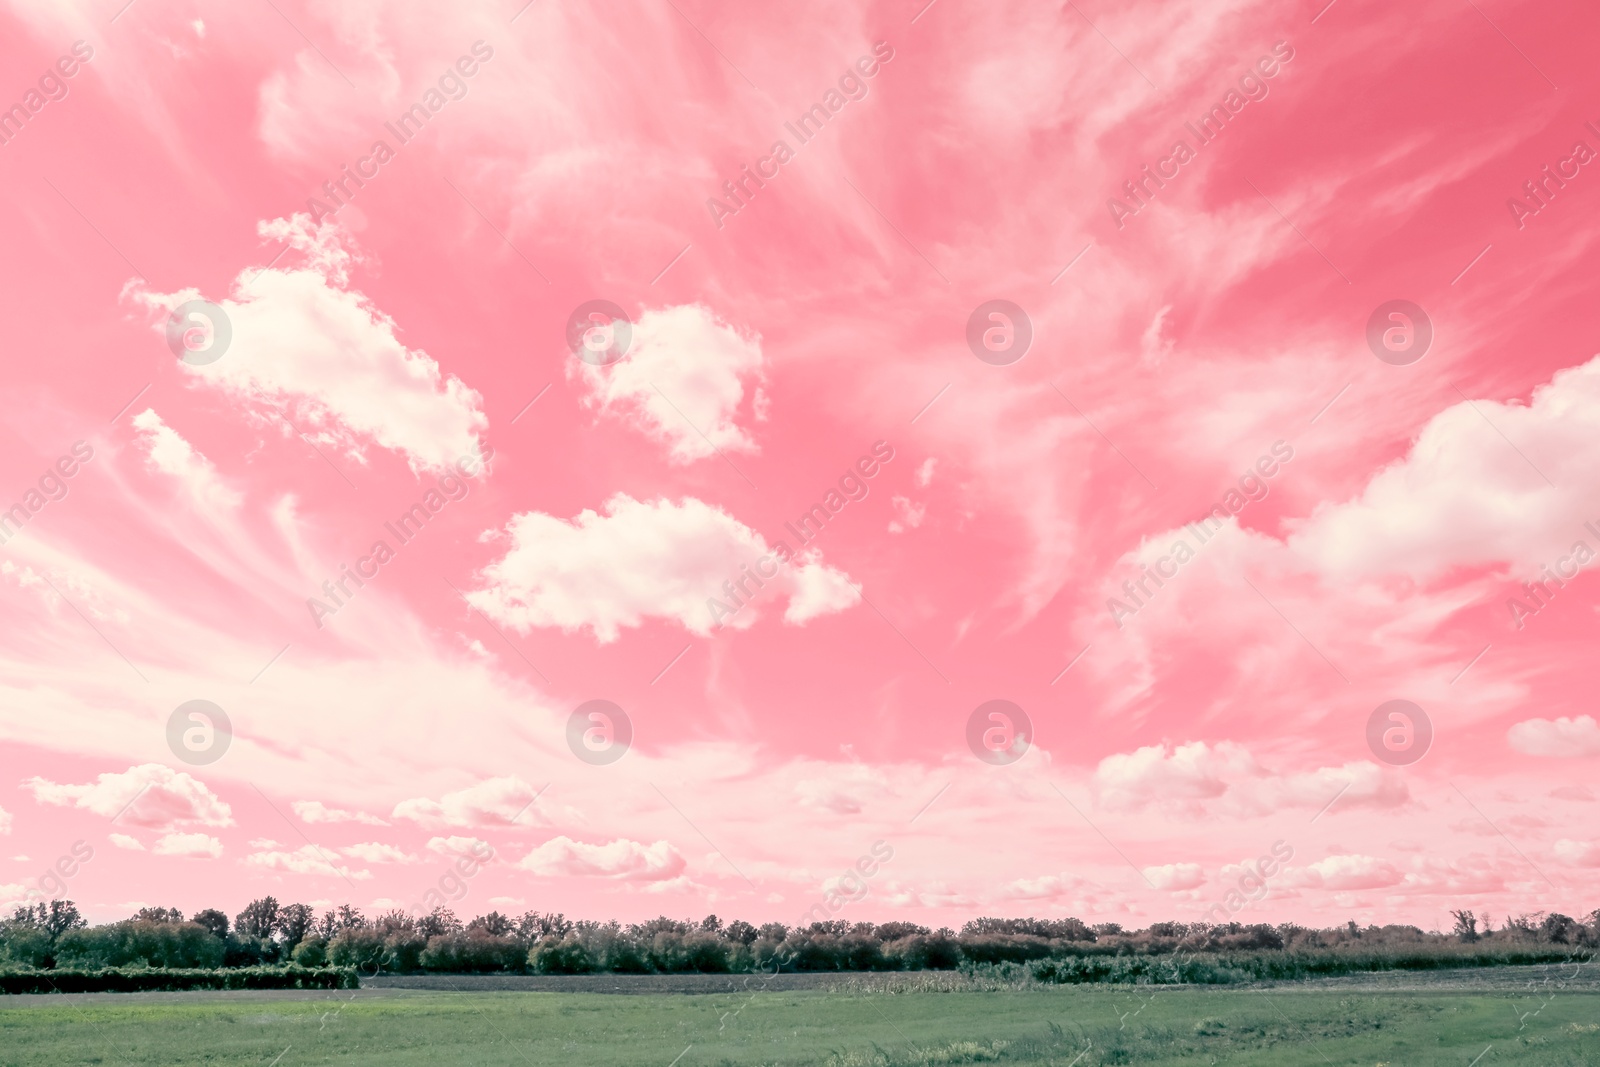 Image of Amazing coral sky with clouds over green meadow and trees